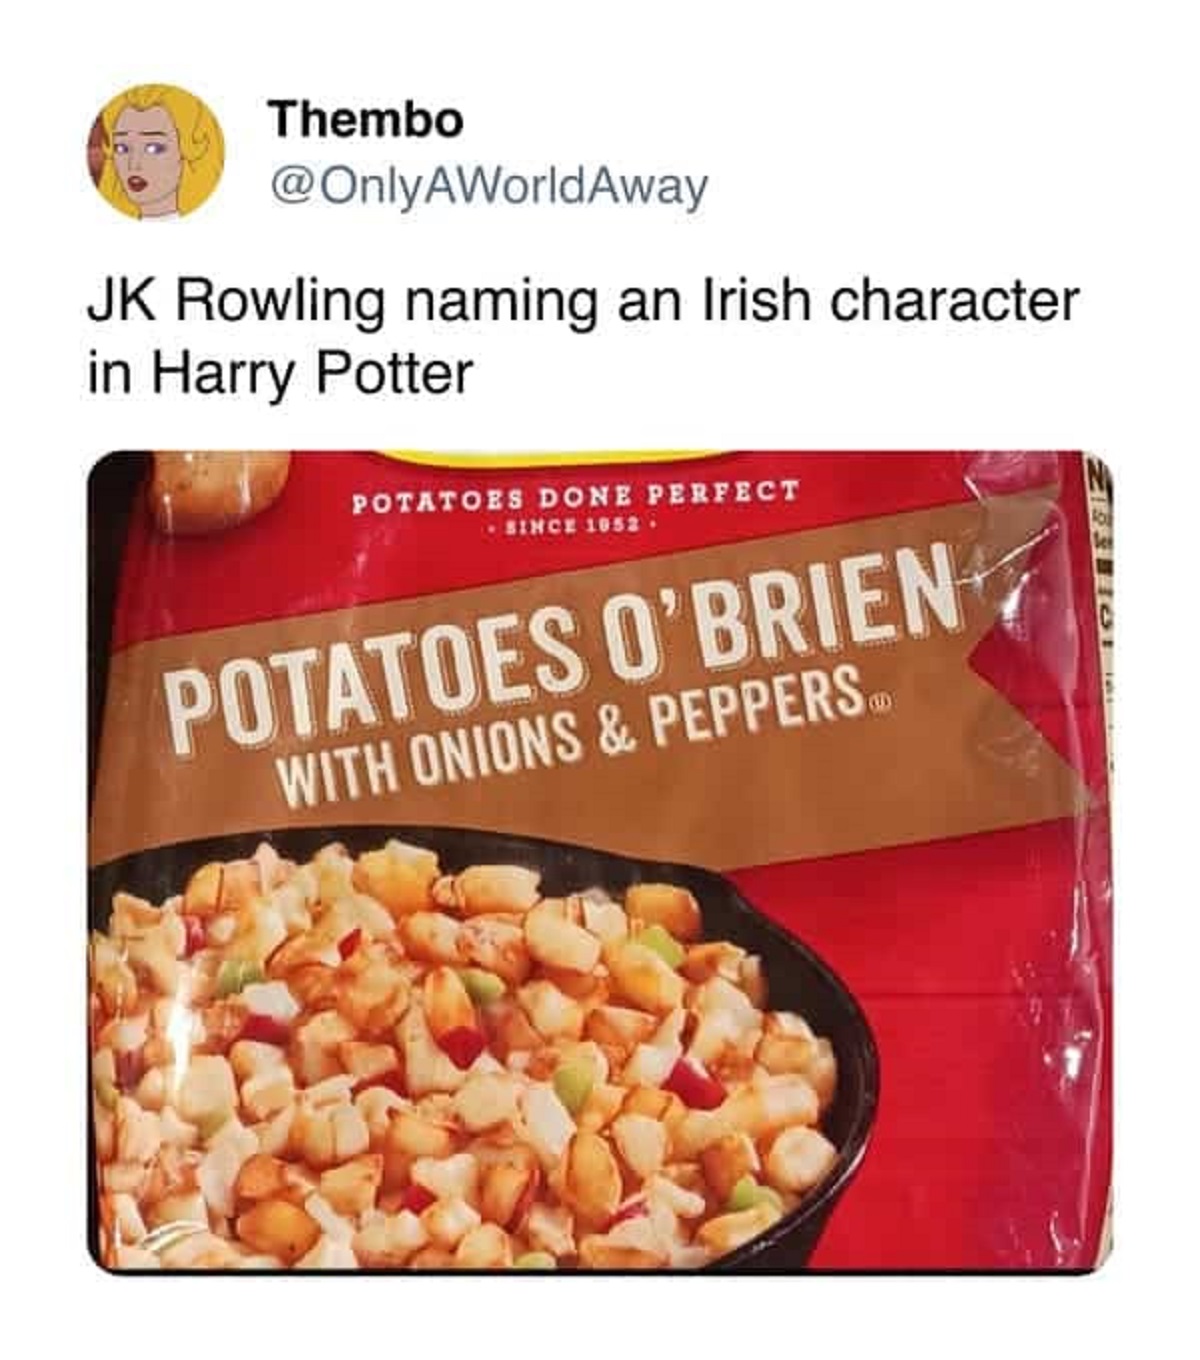 frozen potatoes o brien - Thembo Jk Rowling naming an Irish character in Harry Potter Potatoes Done Perfect Since 1052 Potatoes O'Brien With Onions & Peppers. D